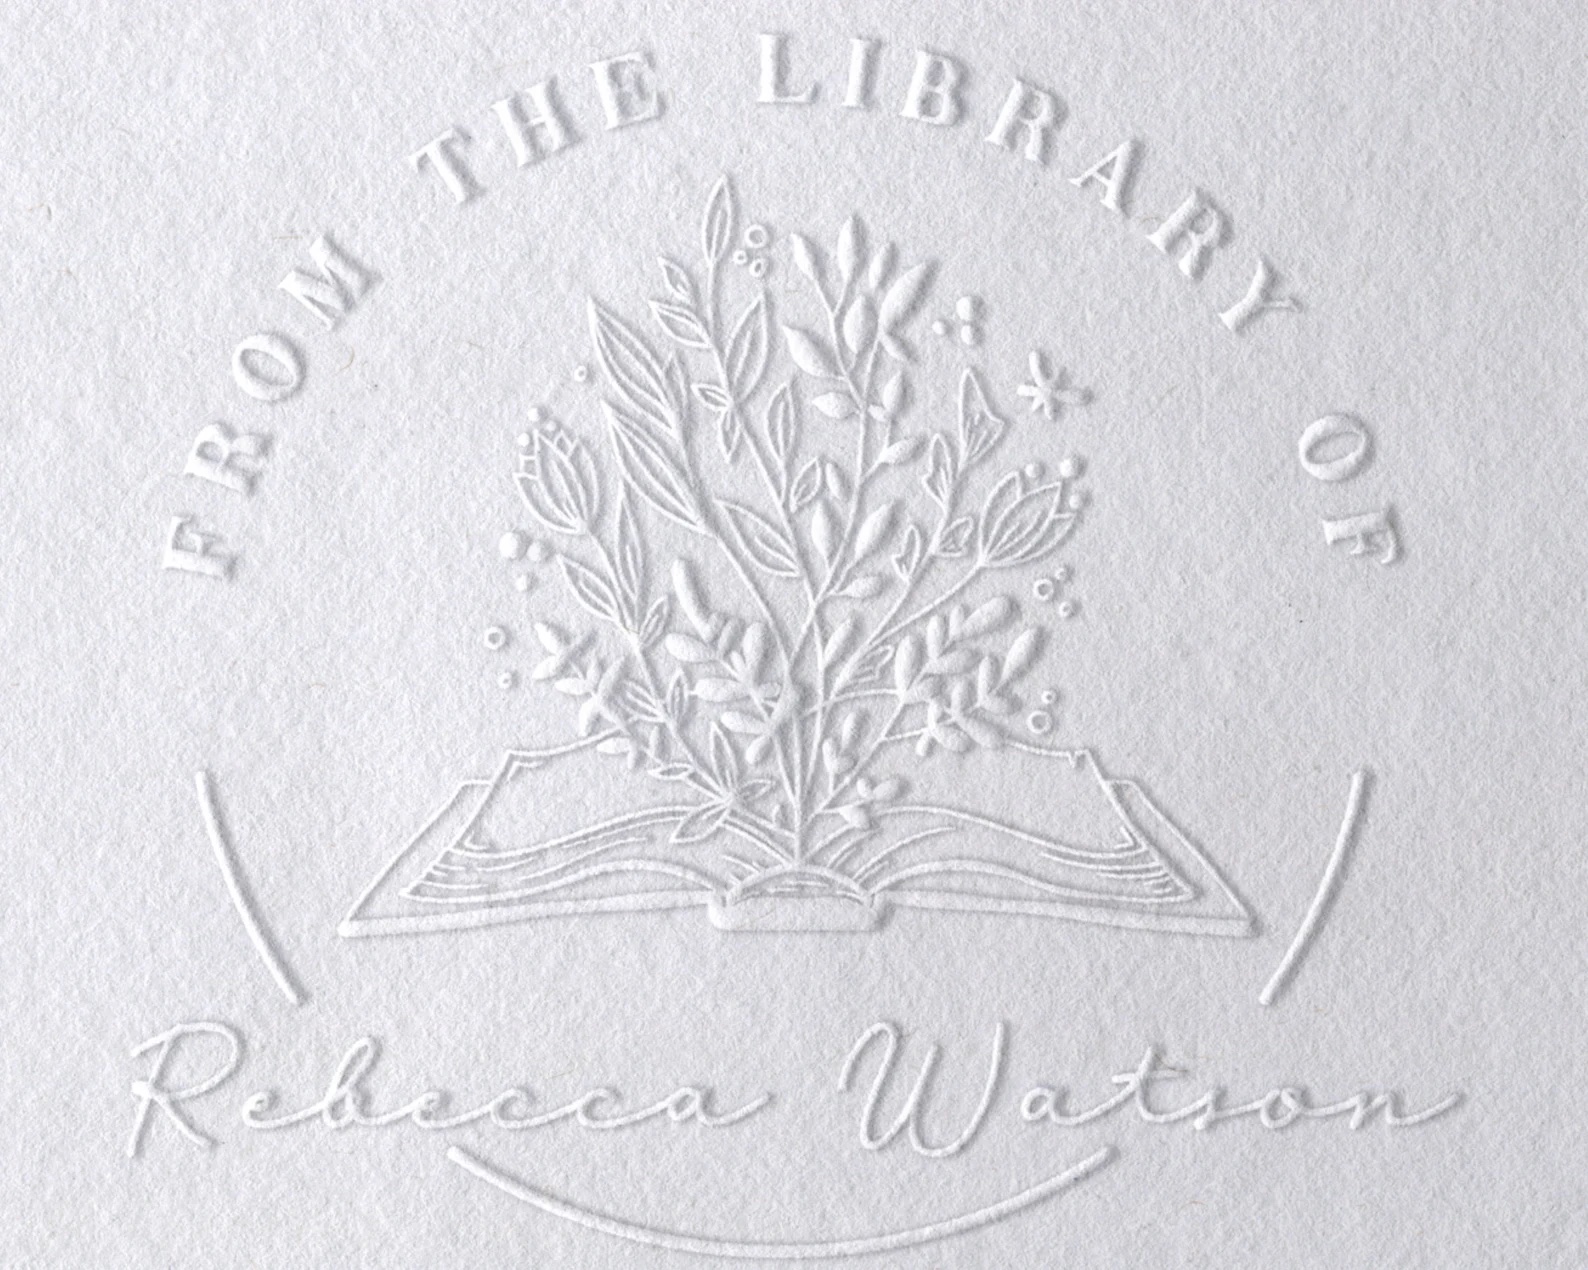 A photo of an embossing on a book page